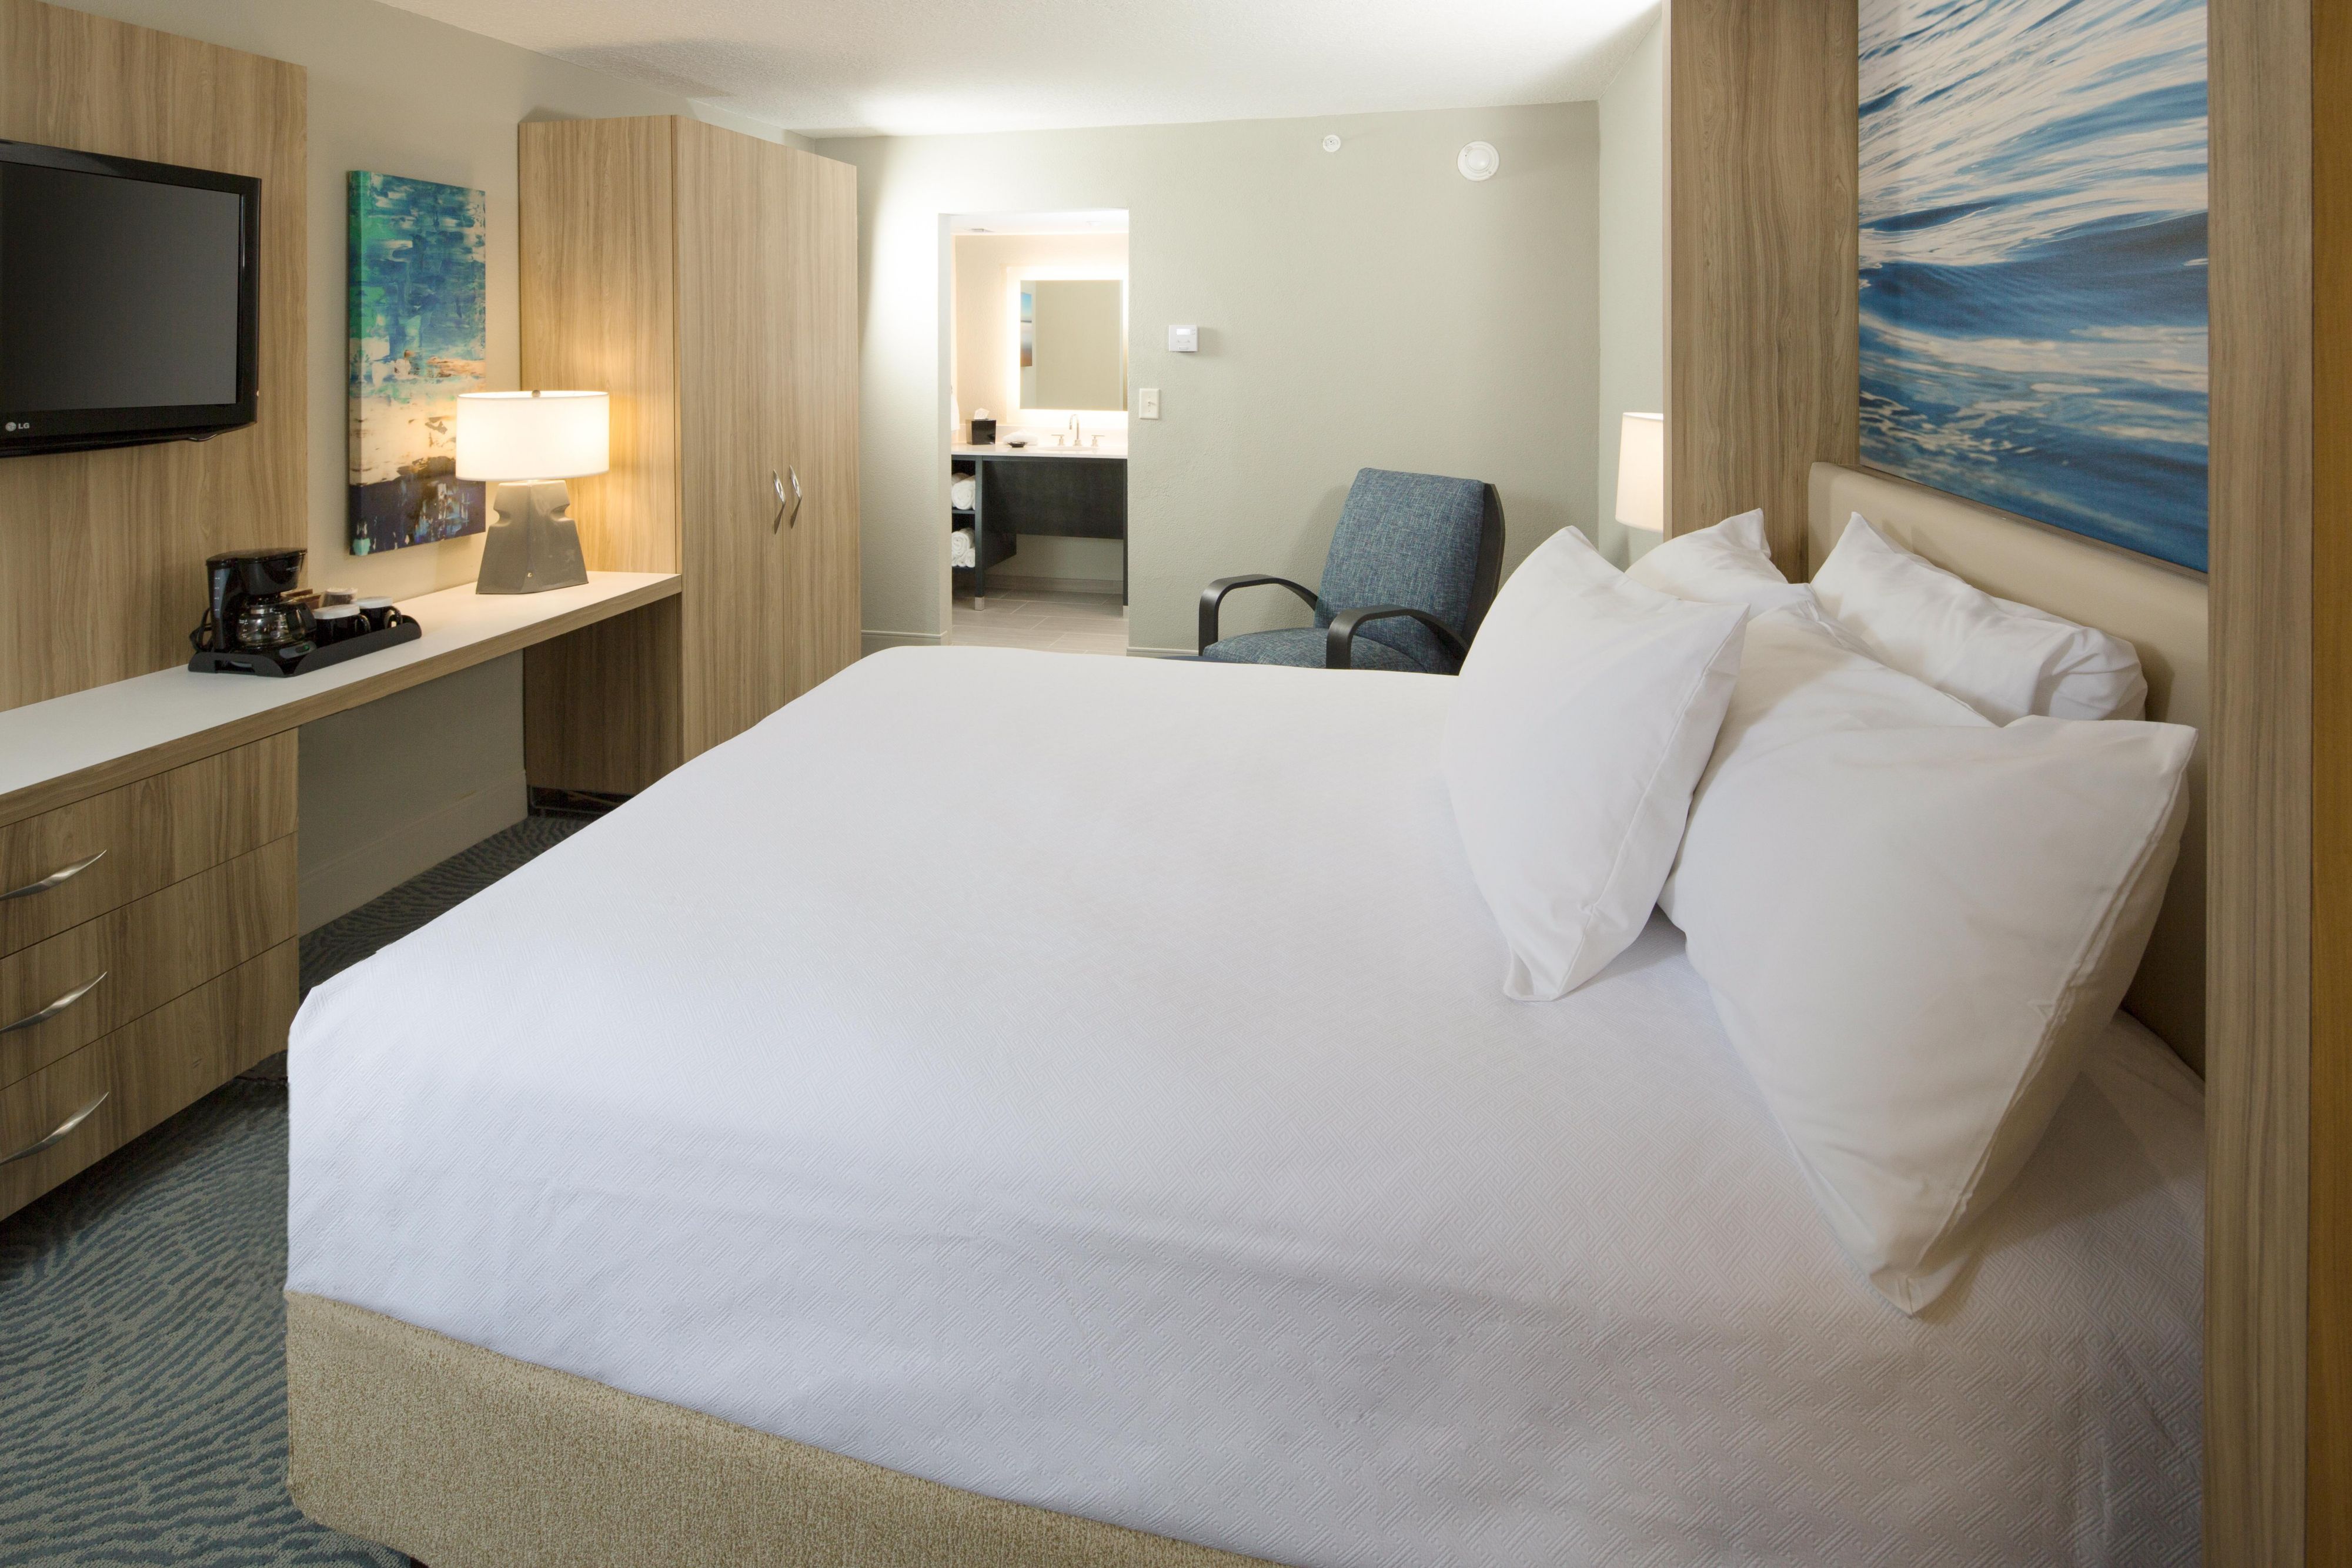 After a long day at the beach relax in one of our guest rooms.